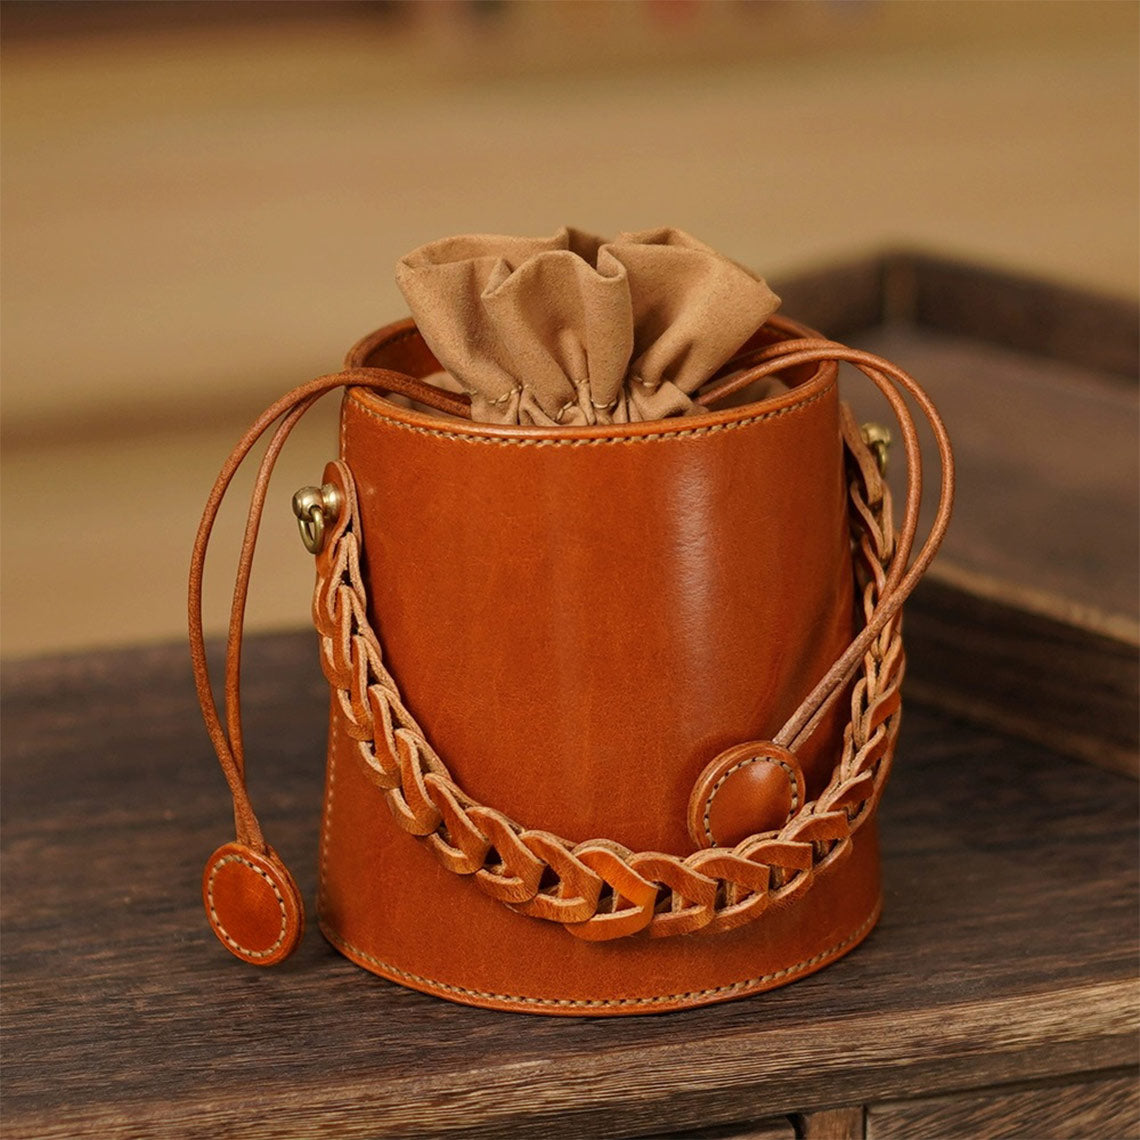 Genuine Leather Kits | Leather Bucket Bag DIY Kit for Beginners - POPSEWING®